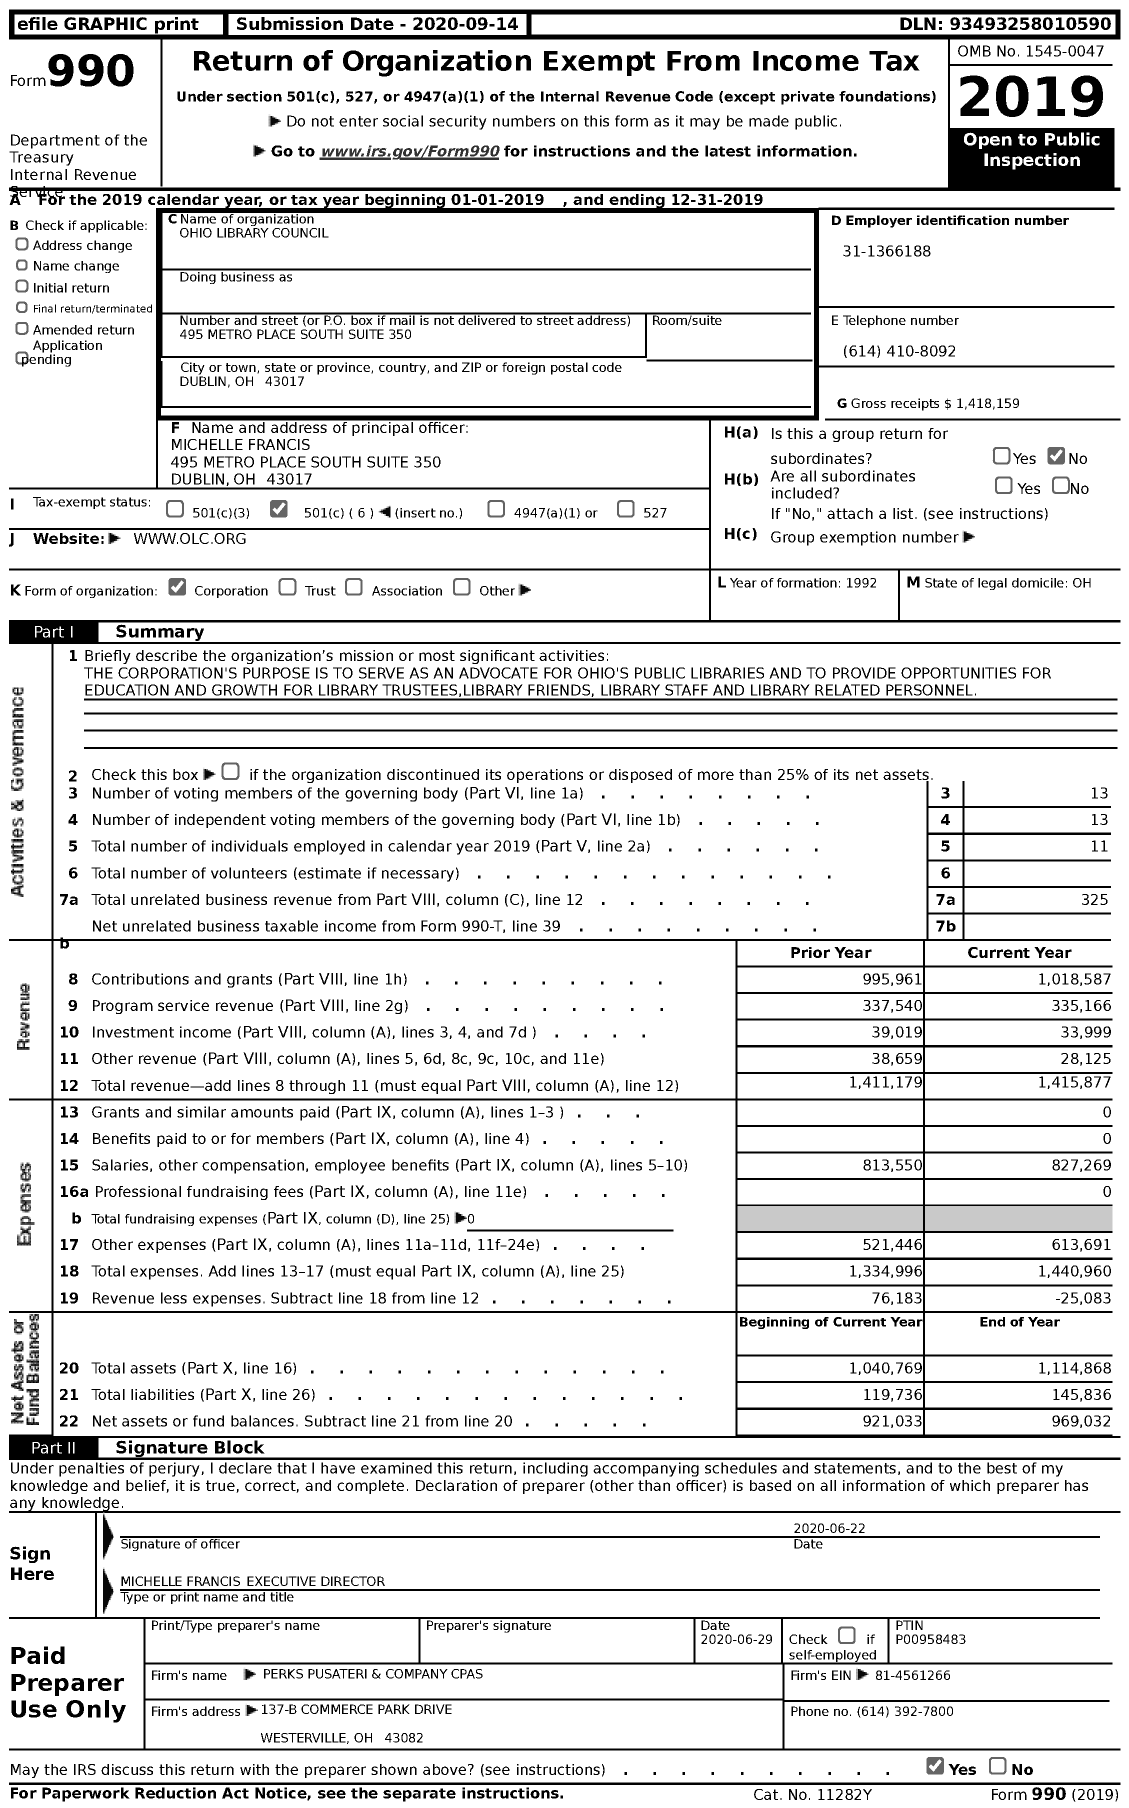 Image of first page of 2019 Form 990 for Ohio Library Council (OLC)